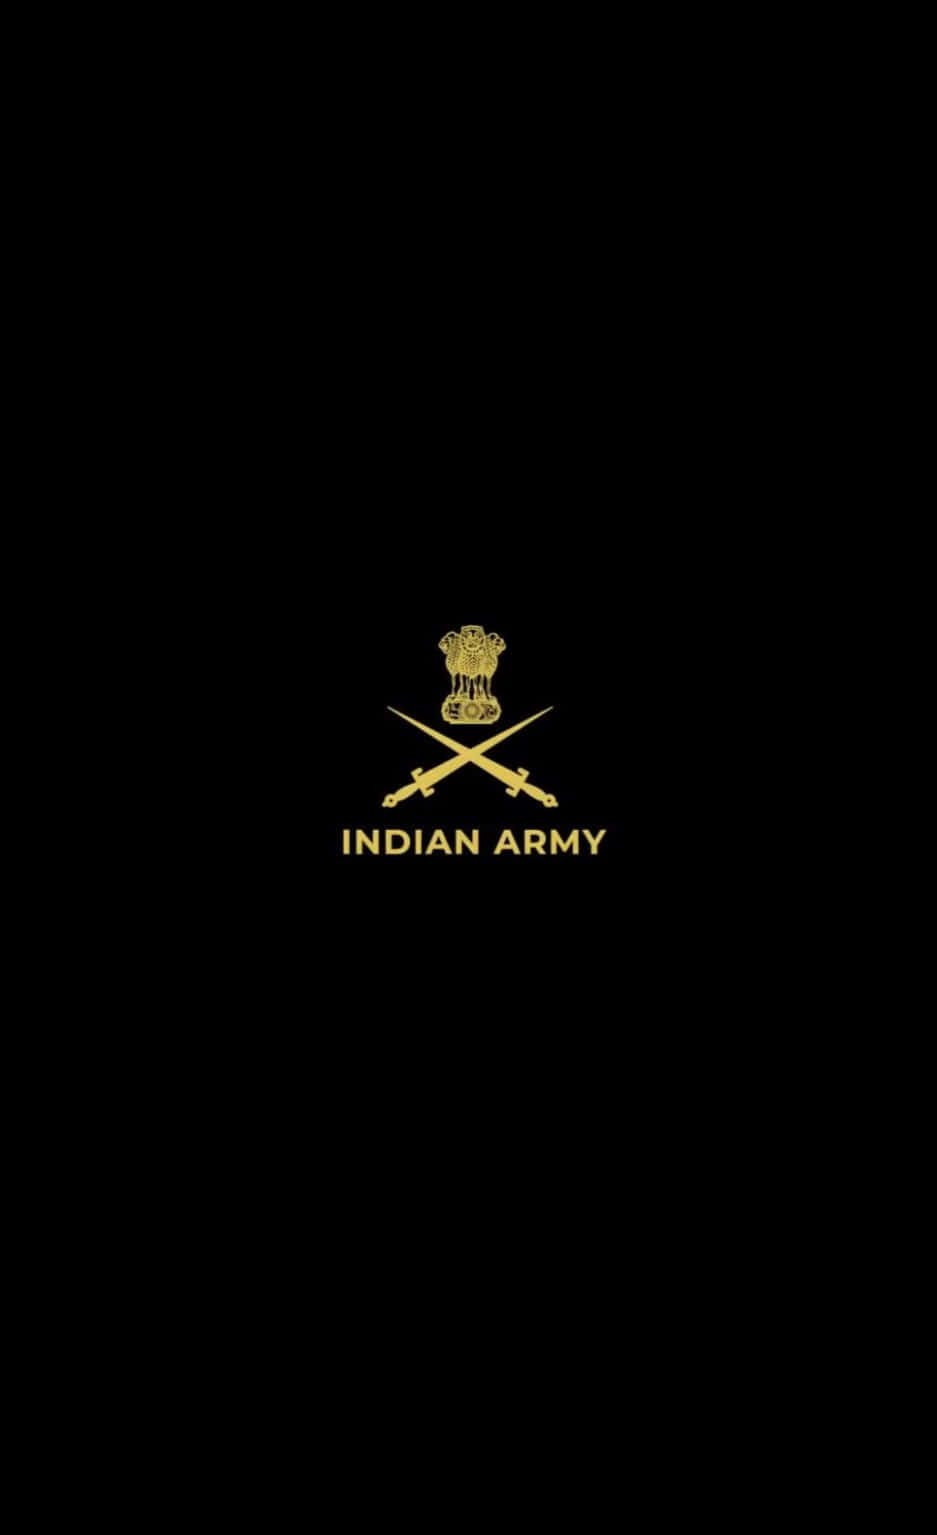 "Carrying the strength of India Forward - Indian Army"